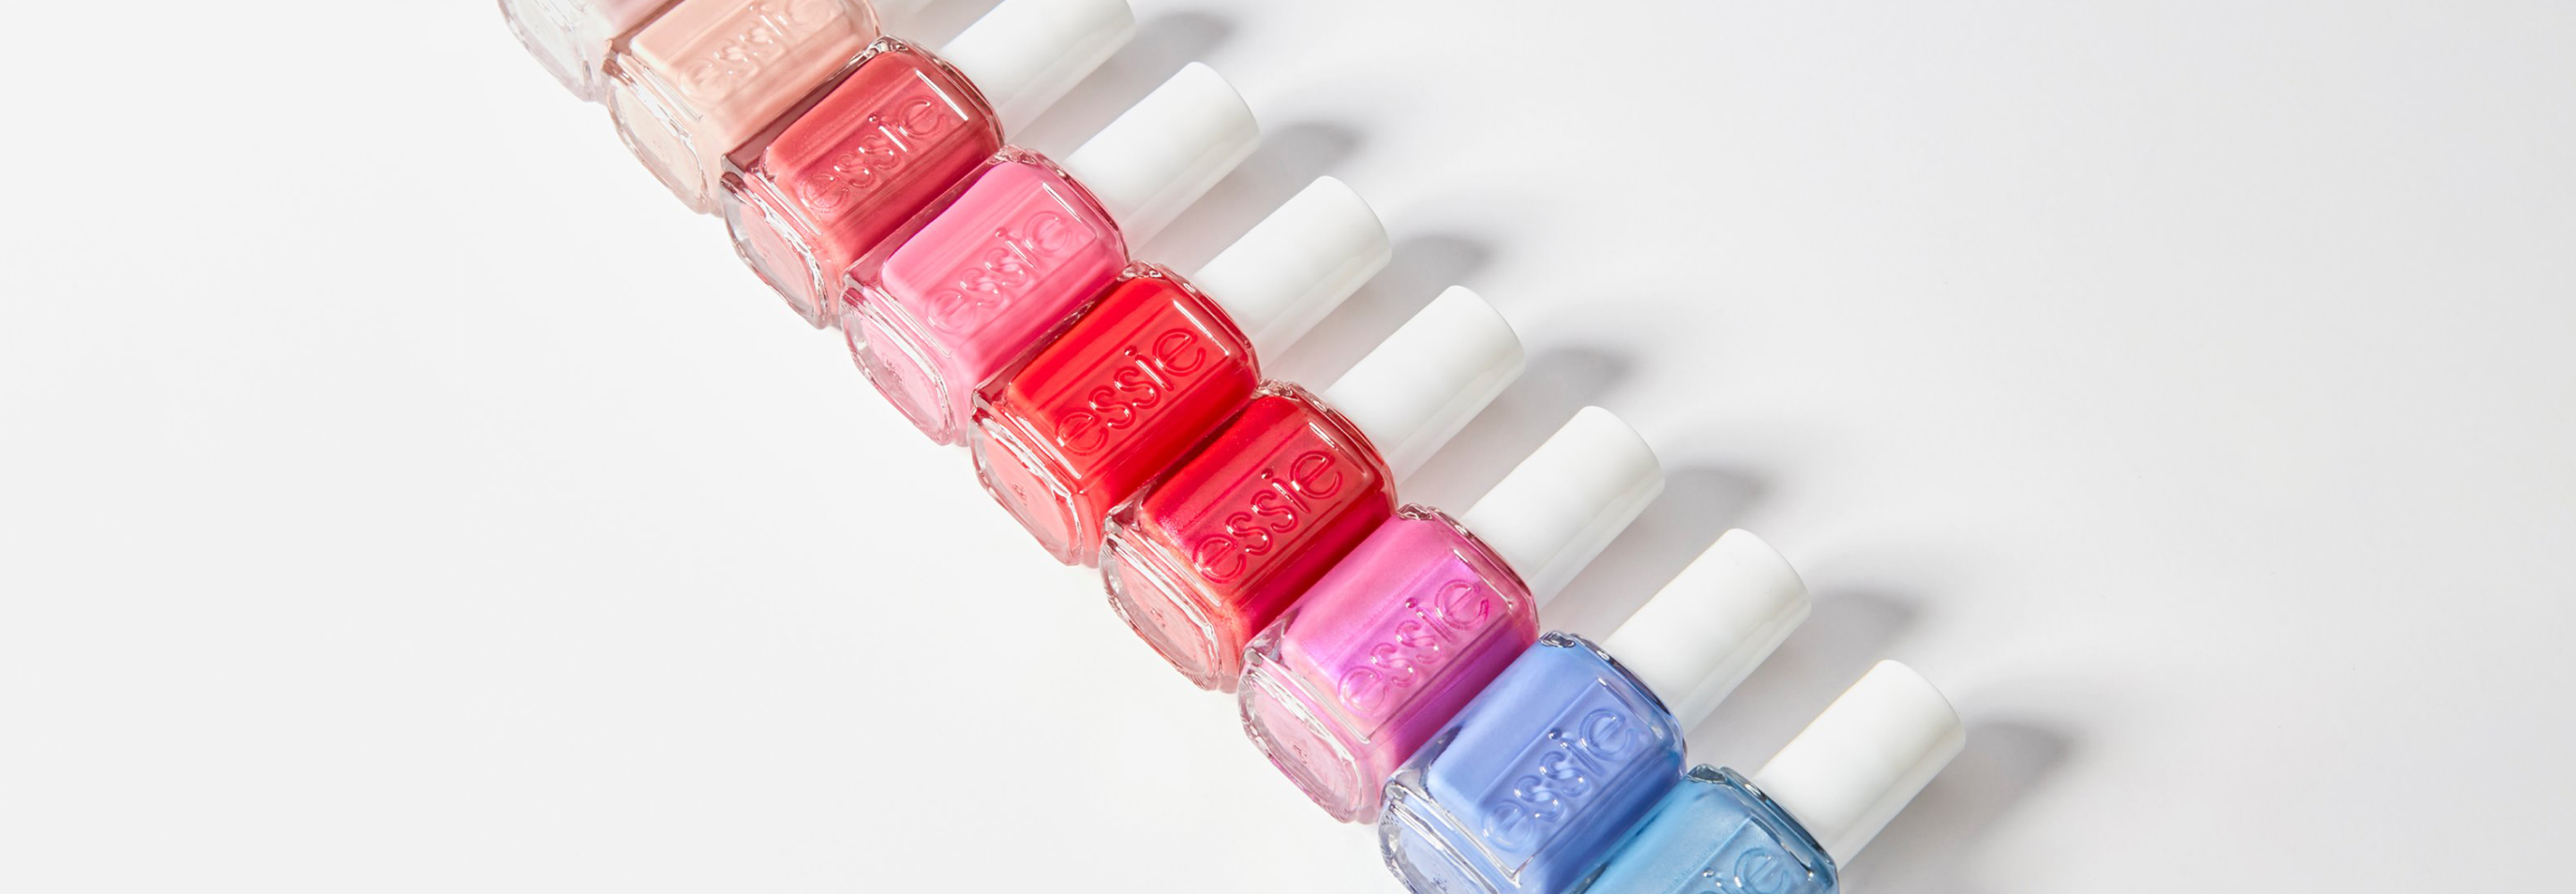 Favorite Essie Polishes Right Now - The Beauty Look Book